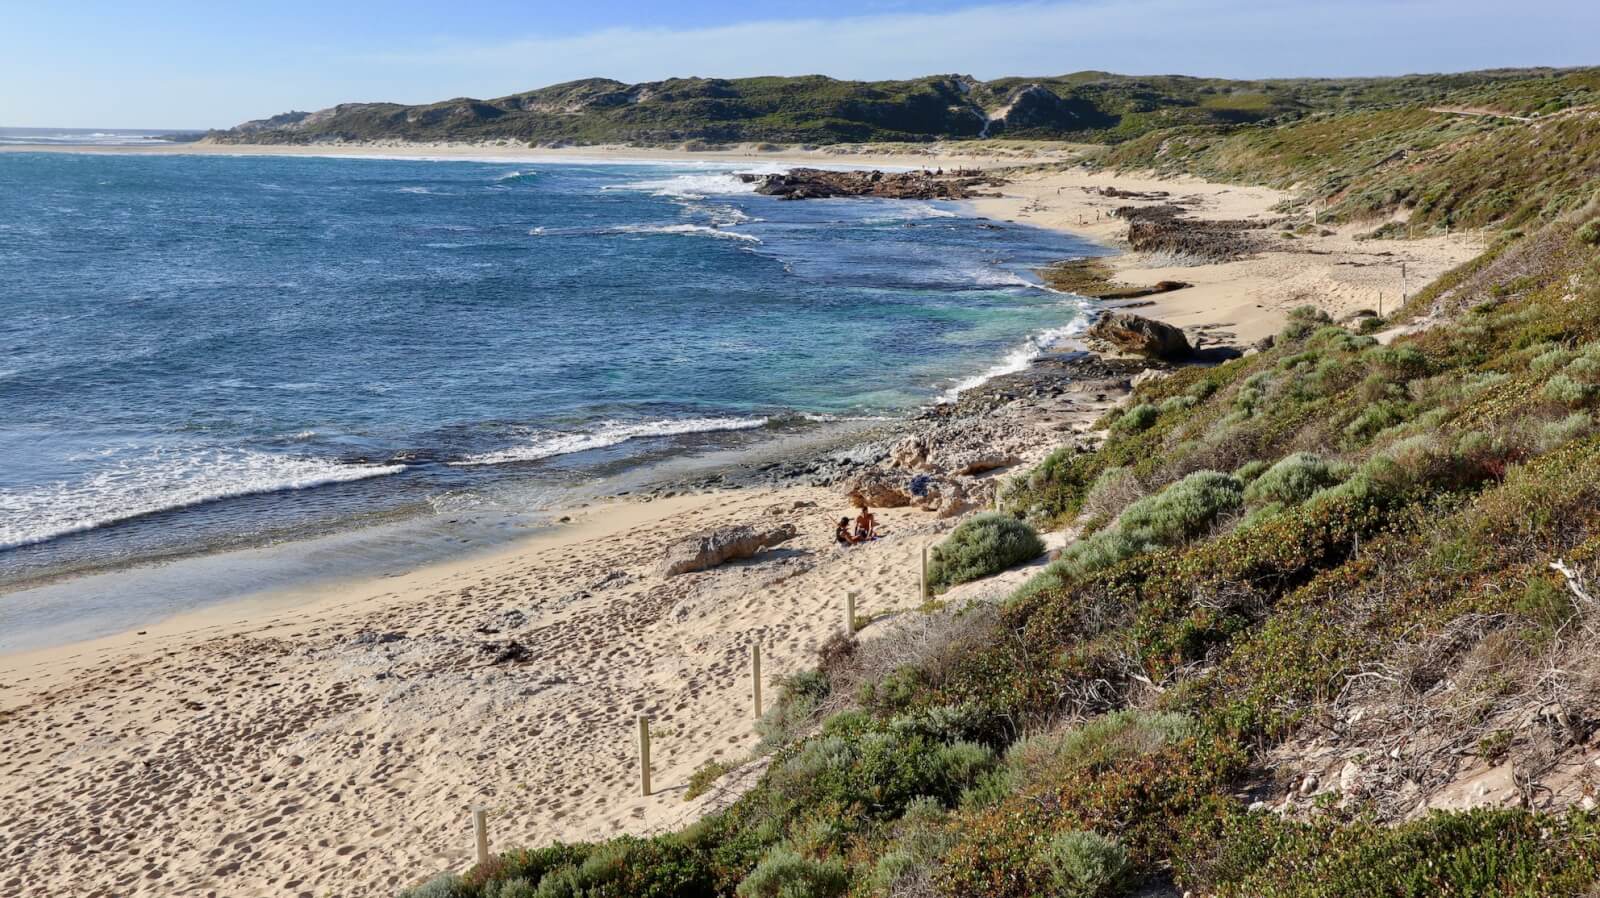 Prevally in Margaret River. Green scrub leads to white sand and the blue ocean. 